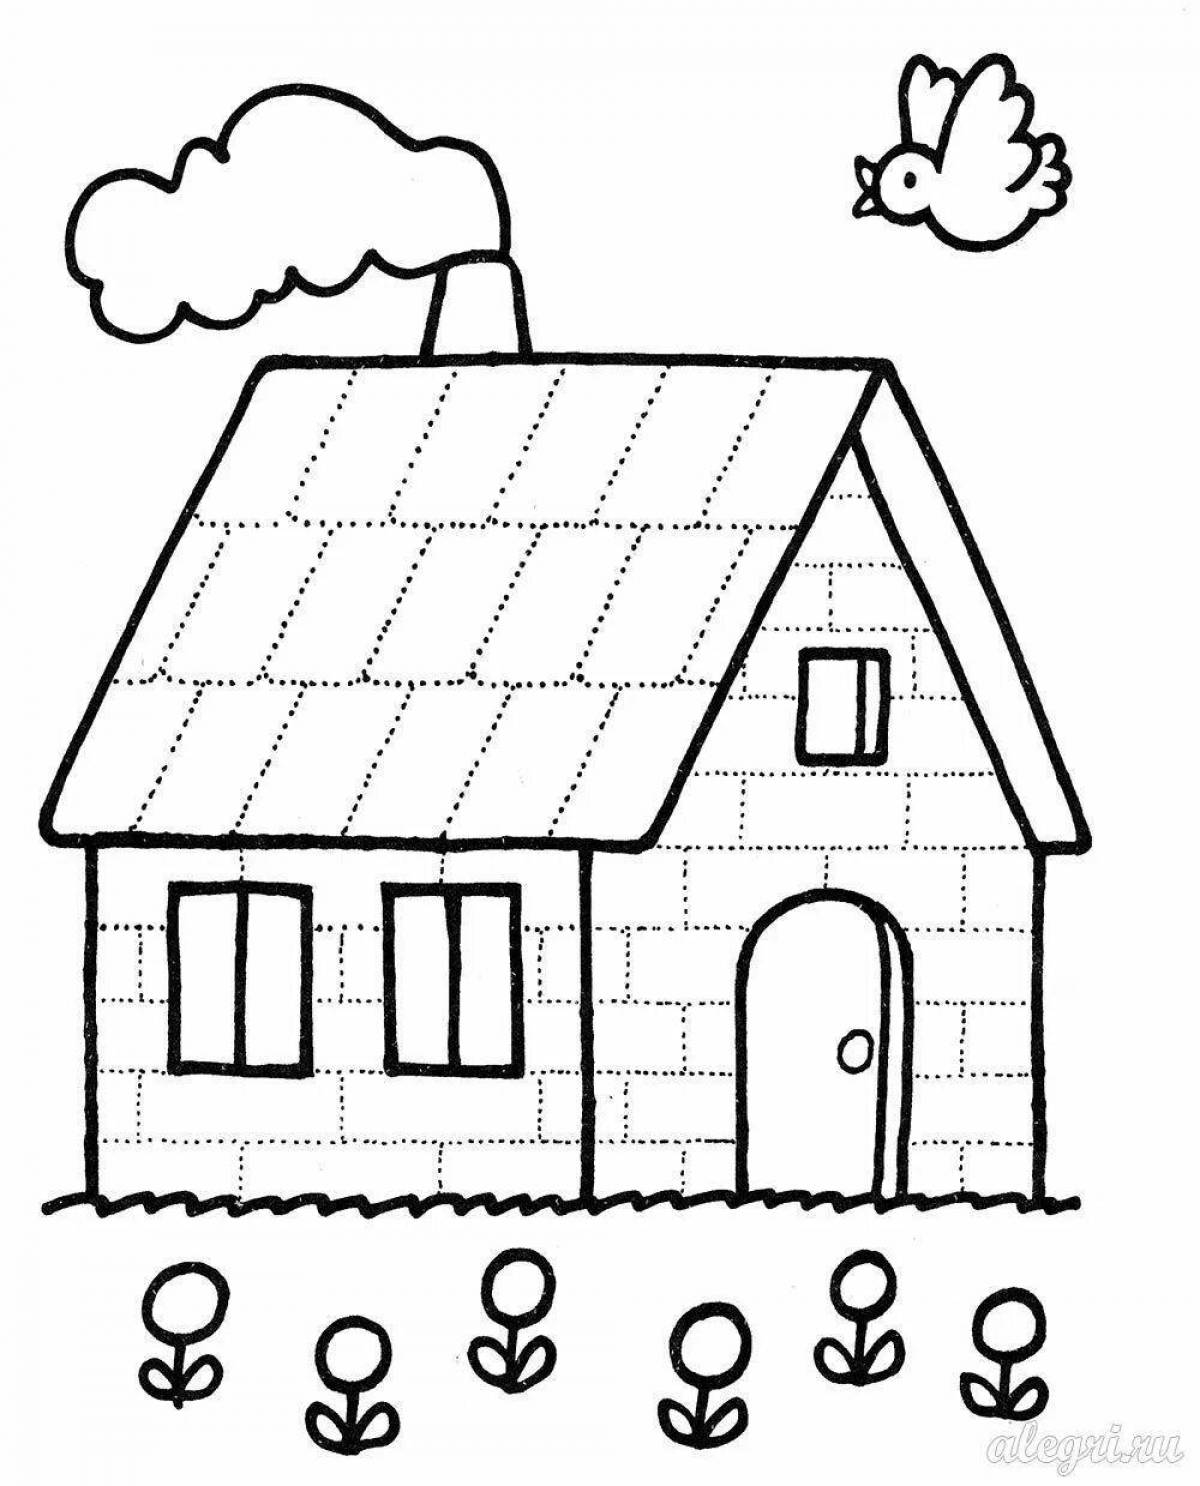 Amazing educational house coloring book